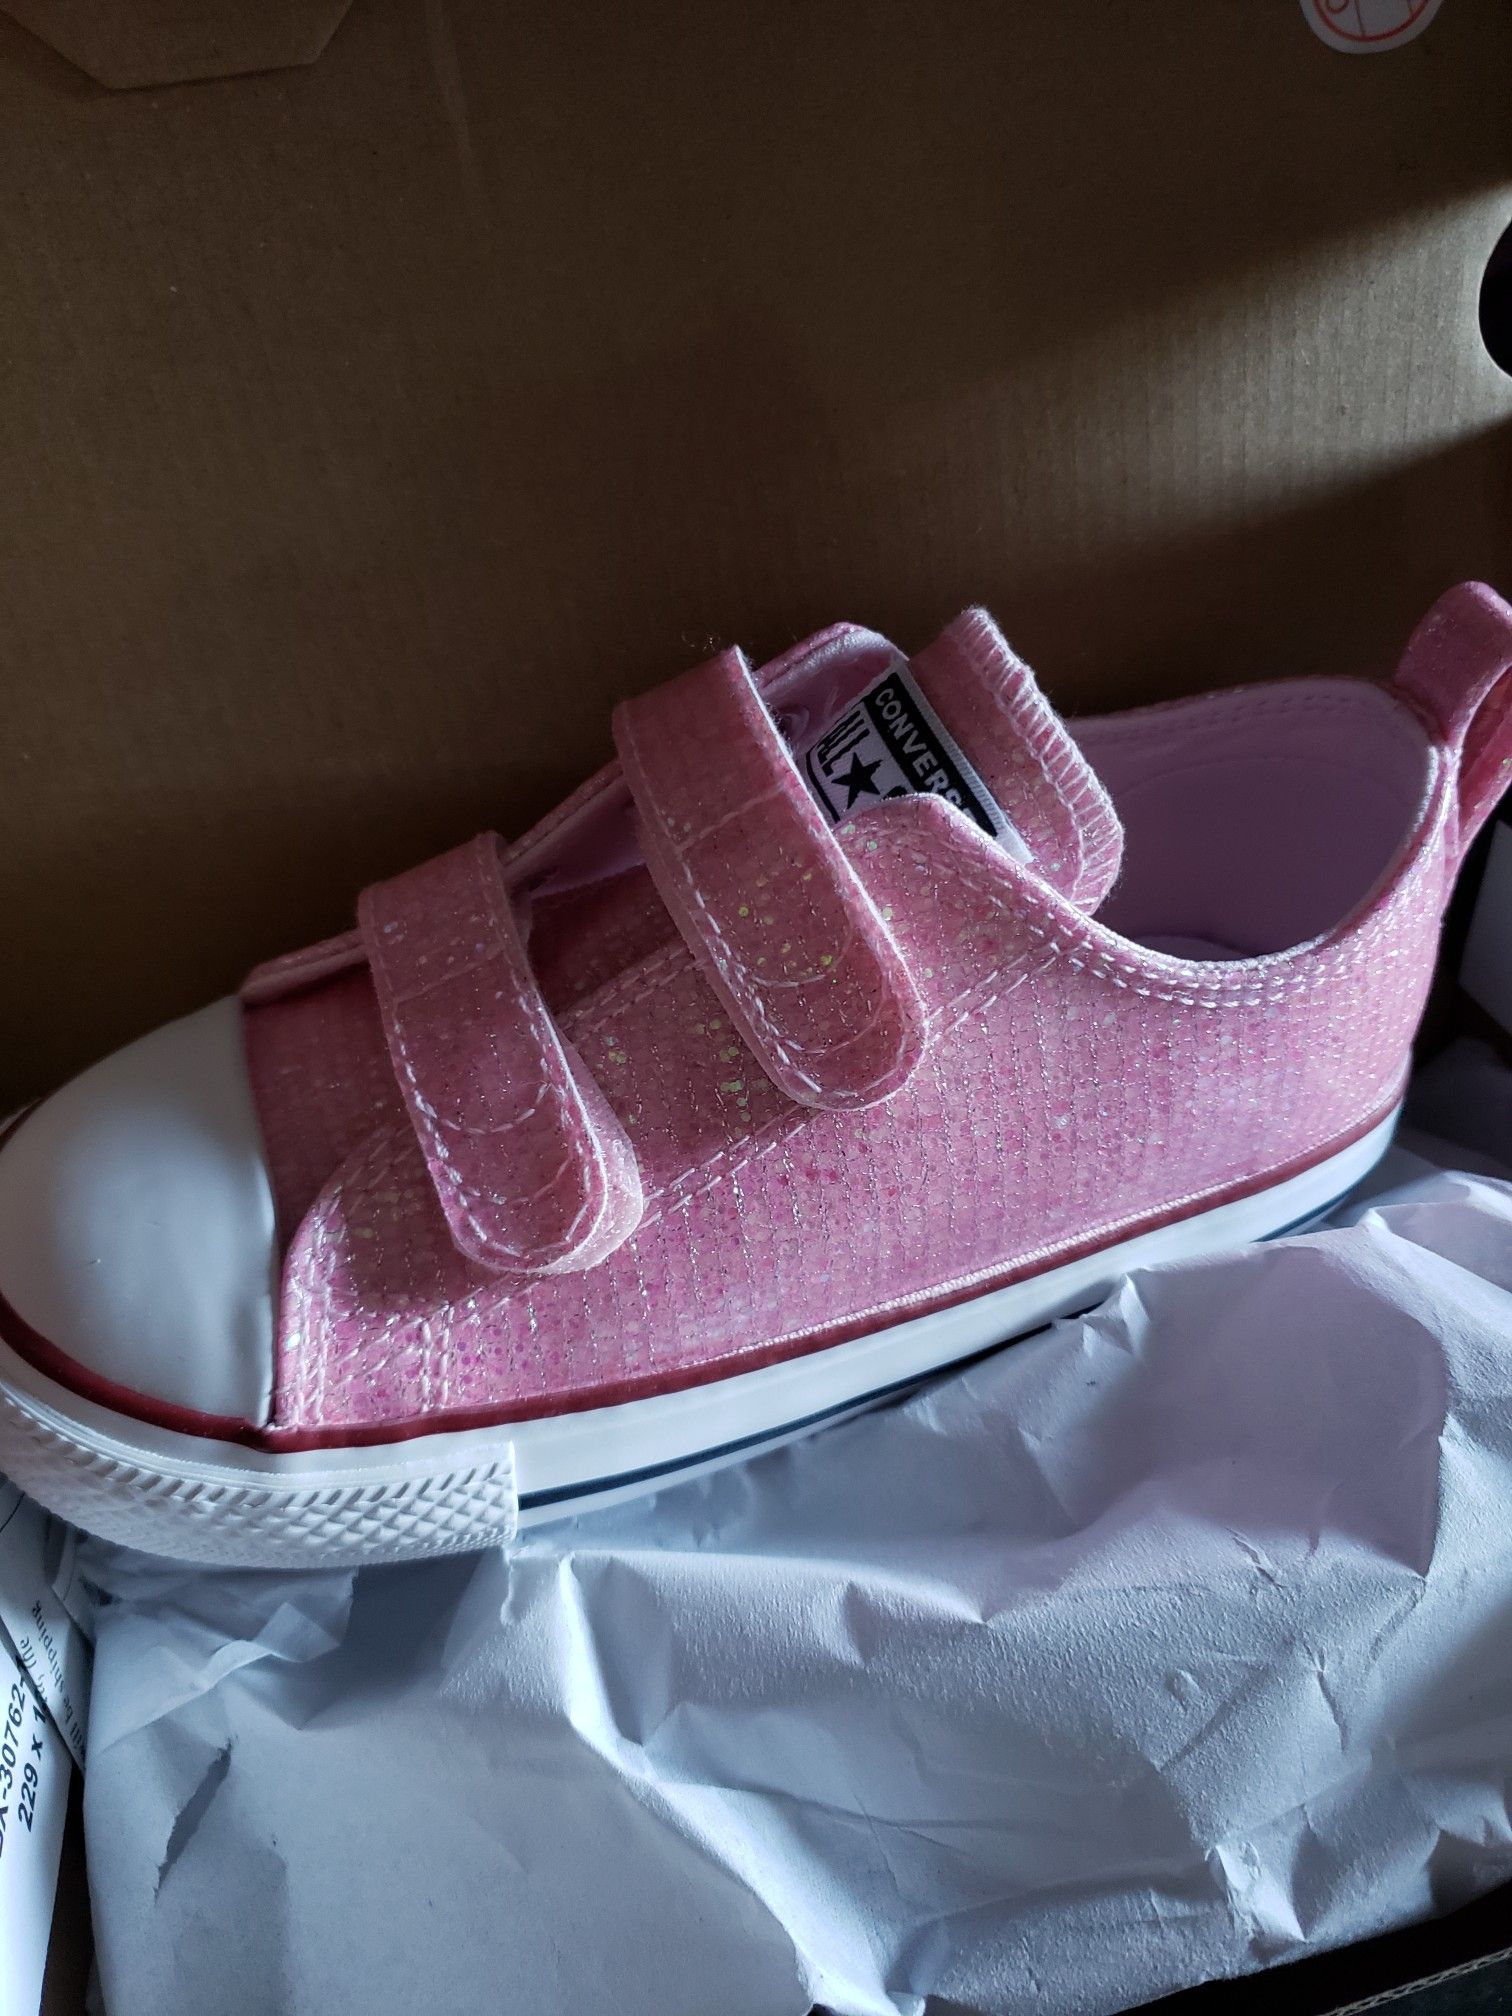 NEW sparkly pink toddlee girl size 10c convers